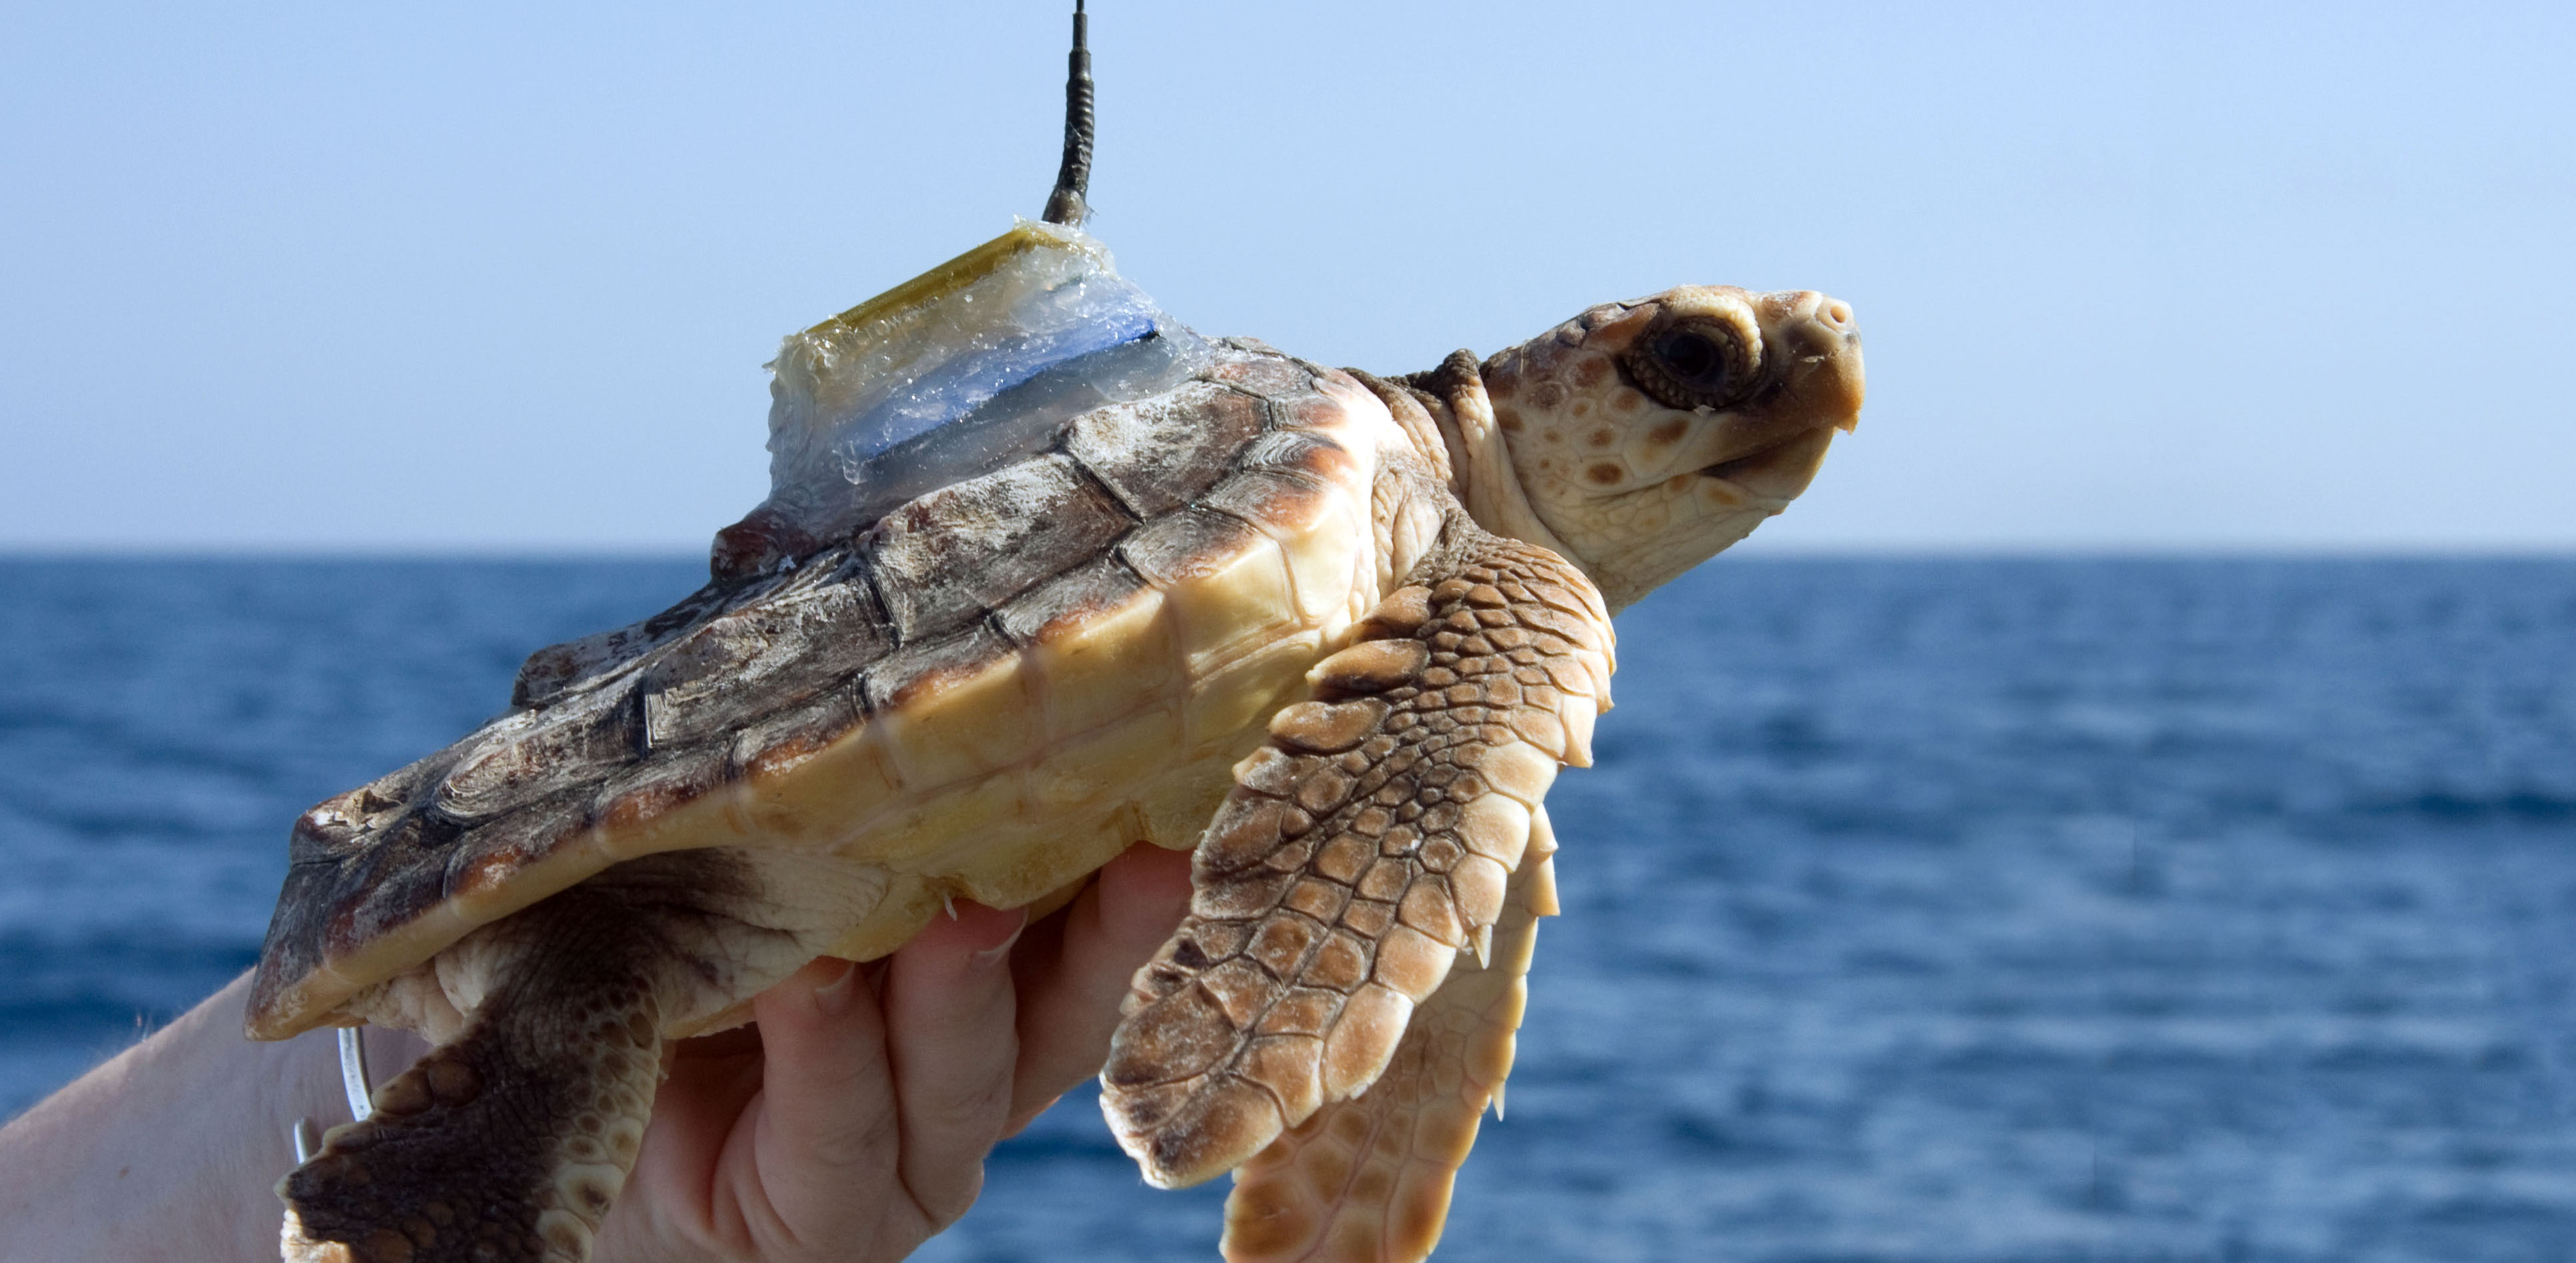 A loggerhead sea turtle, with a satellite tag secured to the turtles hard outer shell, prepares for a journey across the sea that scientists will be able to track.